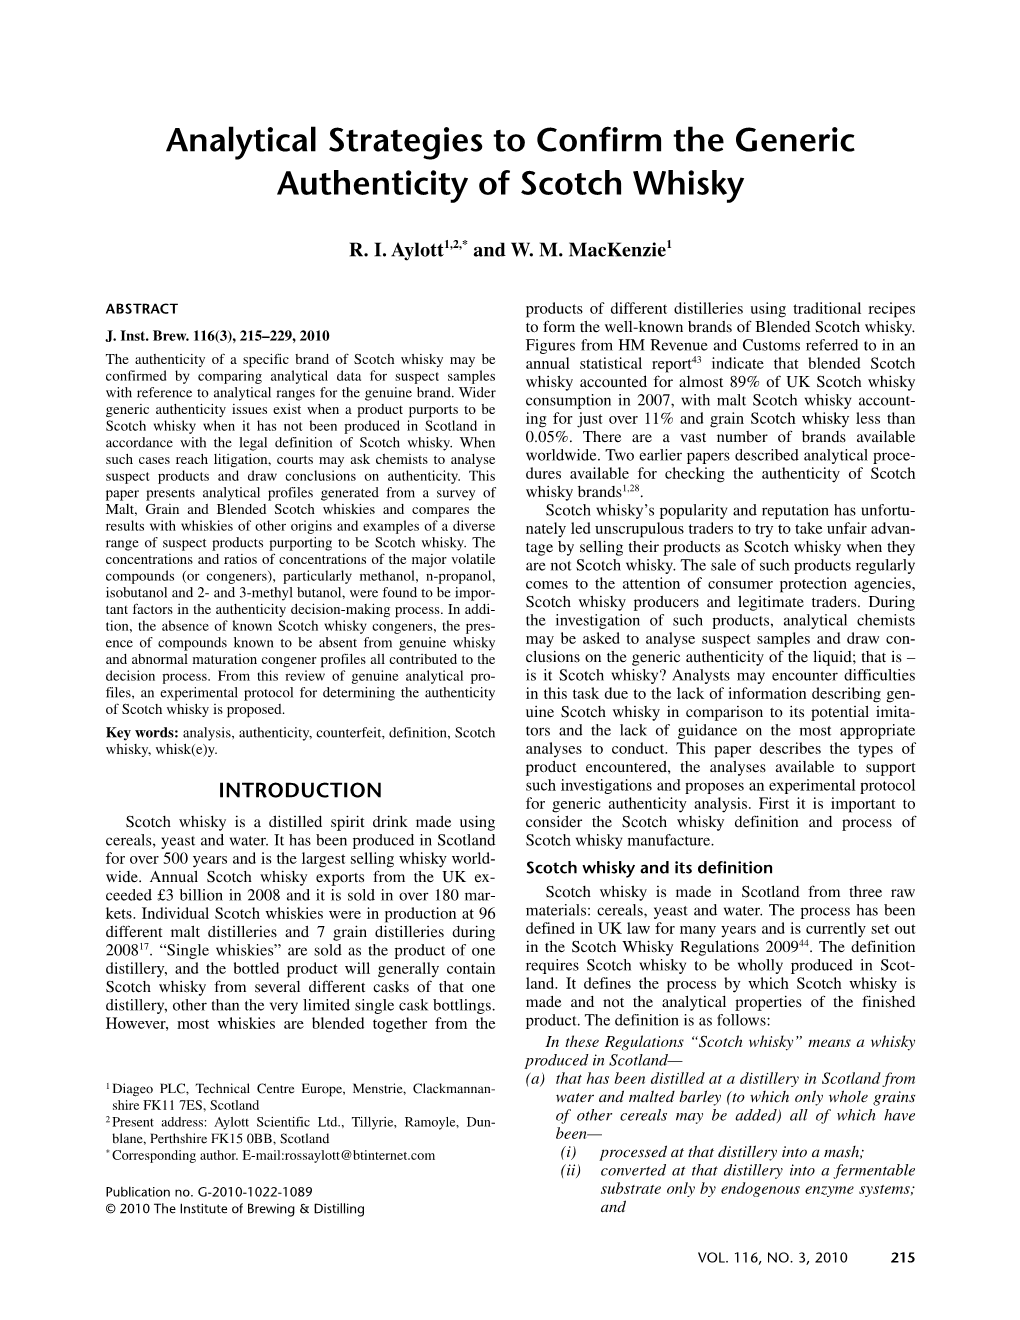 Analytical Strategies to Confirm the Generic Authenticity of Scotch Whisky